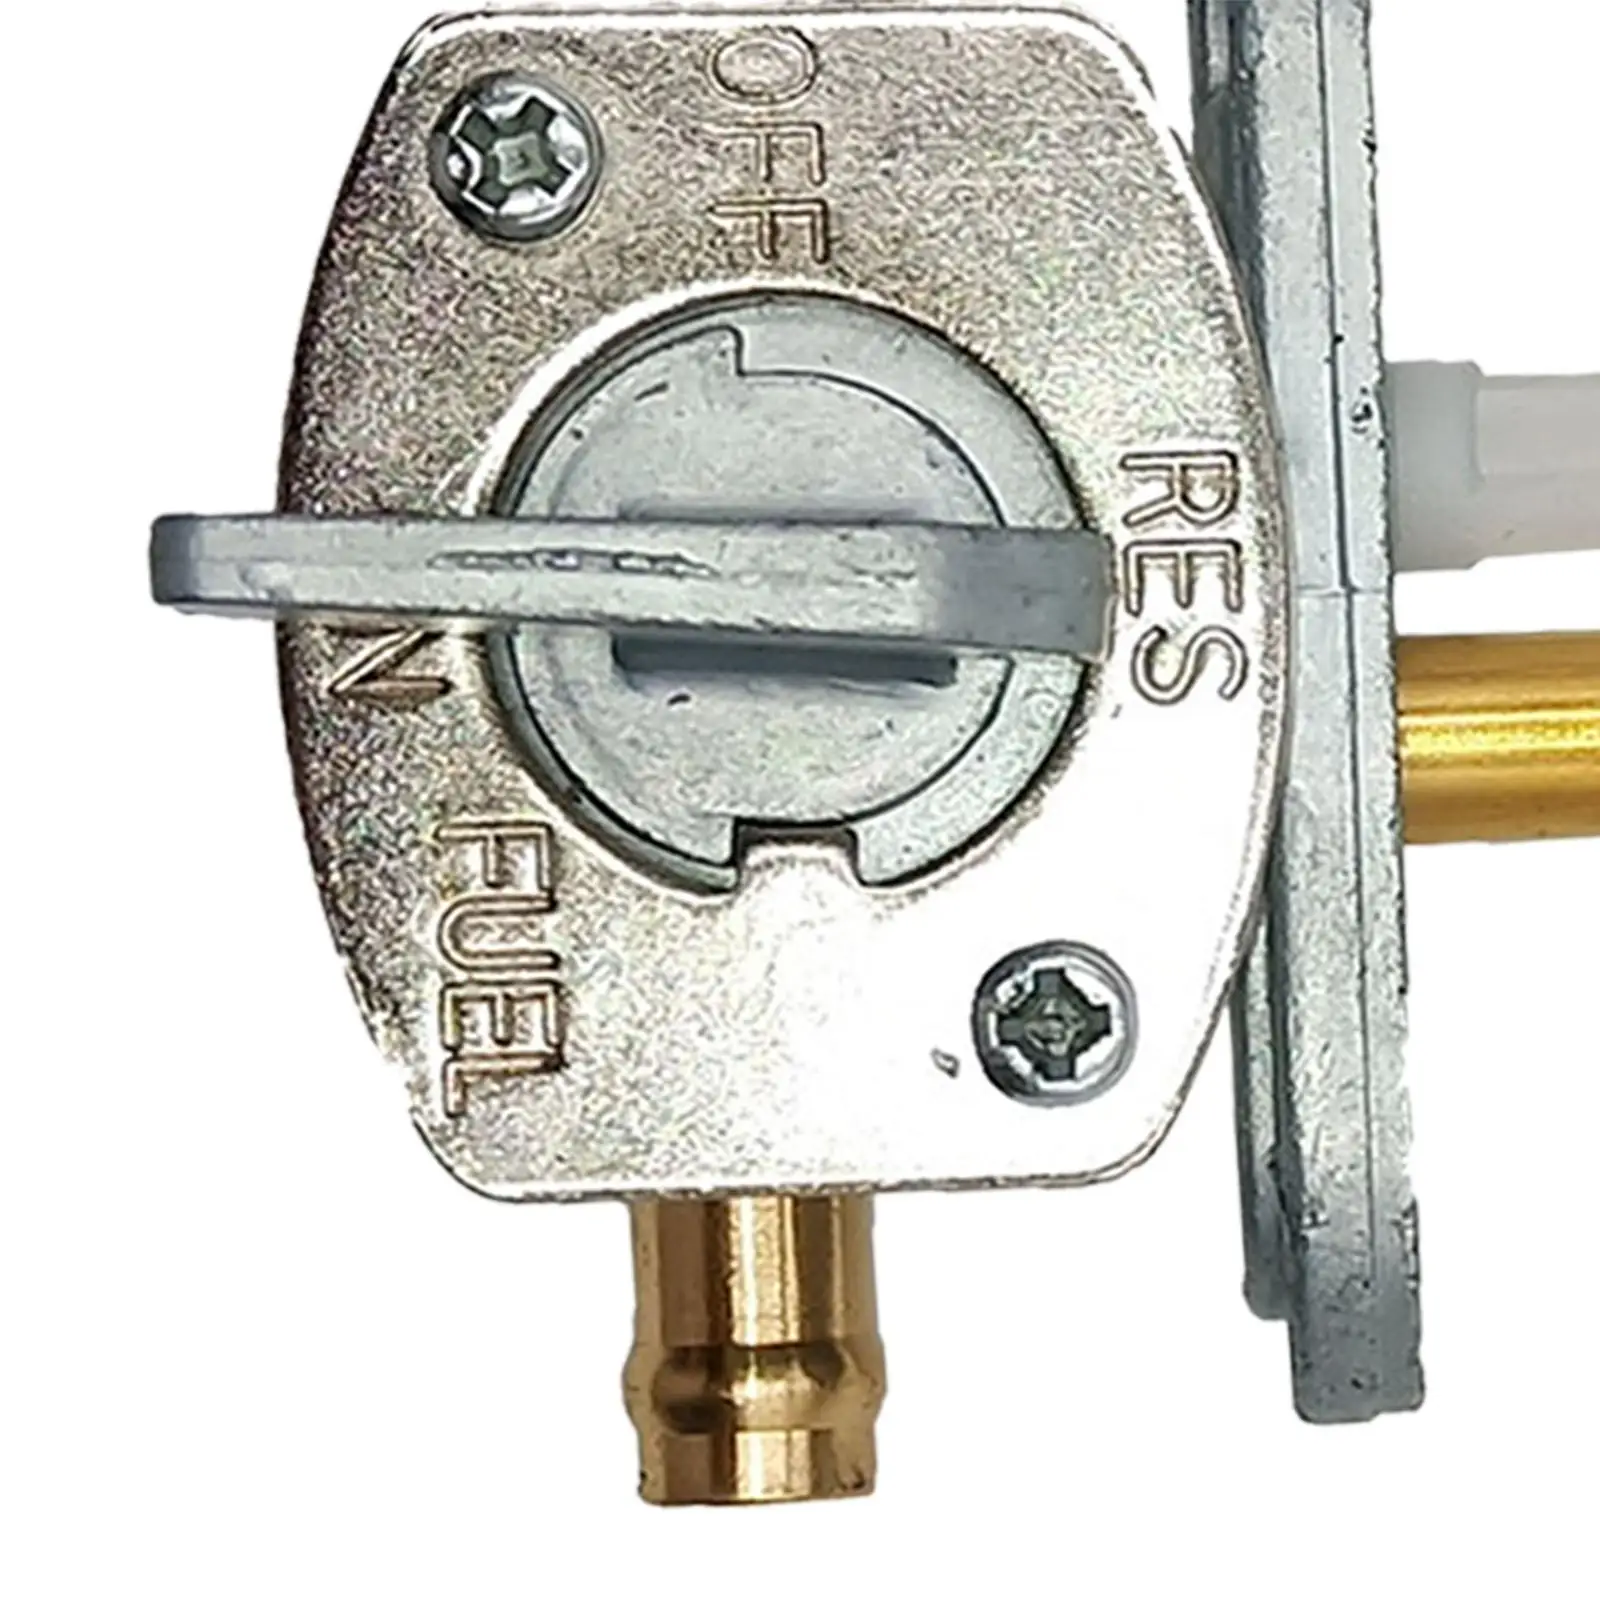 Replace 2Gu-24500-02 Fuel Valve Petcock Replacement for 300 stable characteristics, high reliability